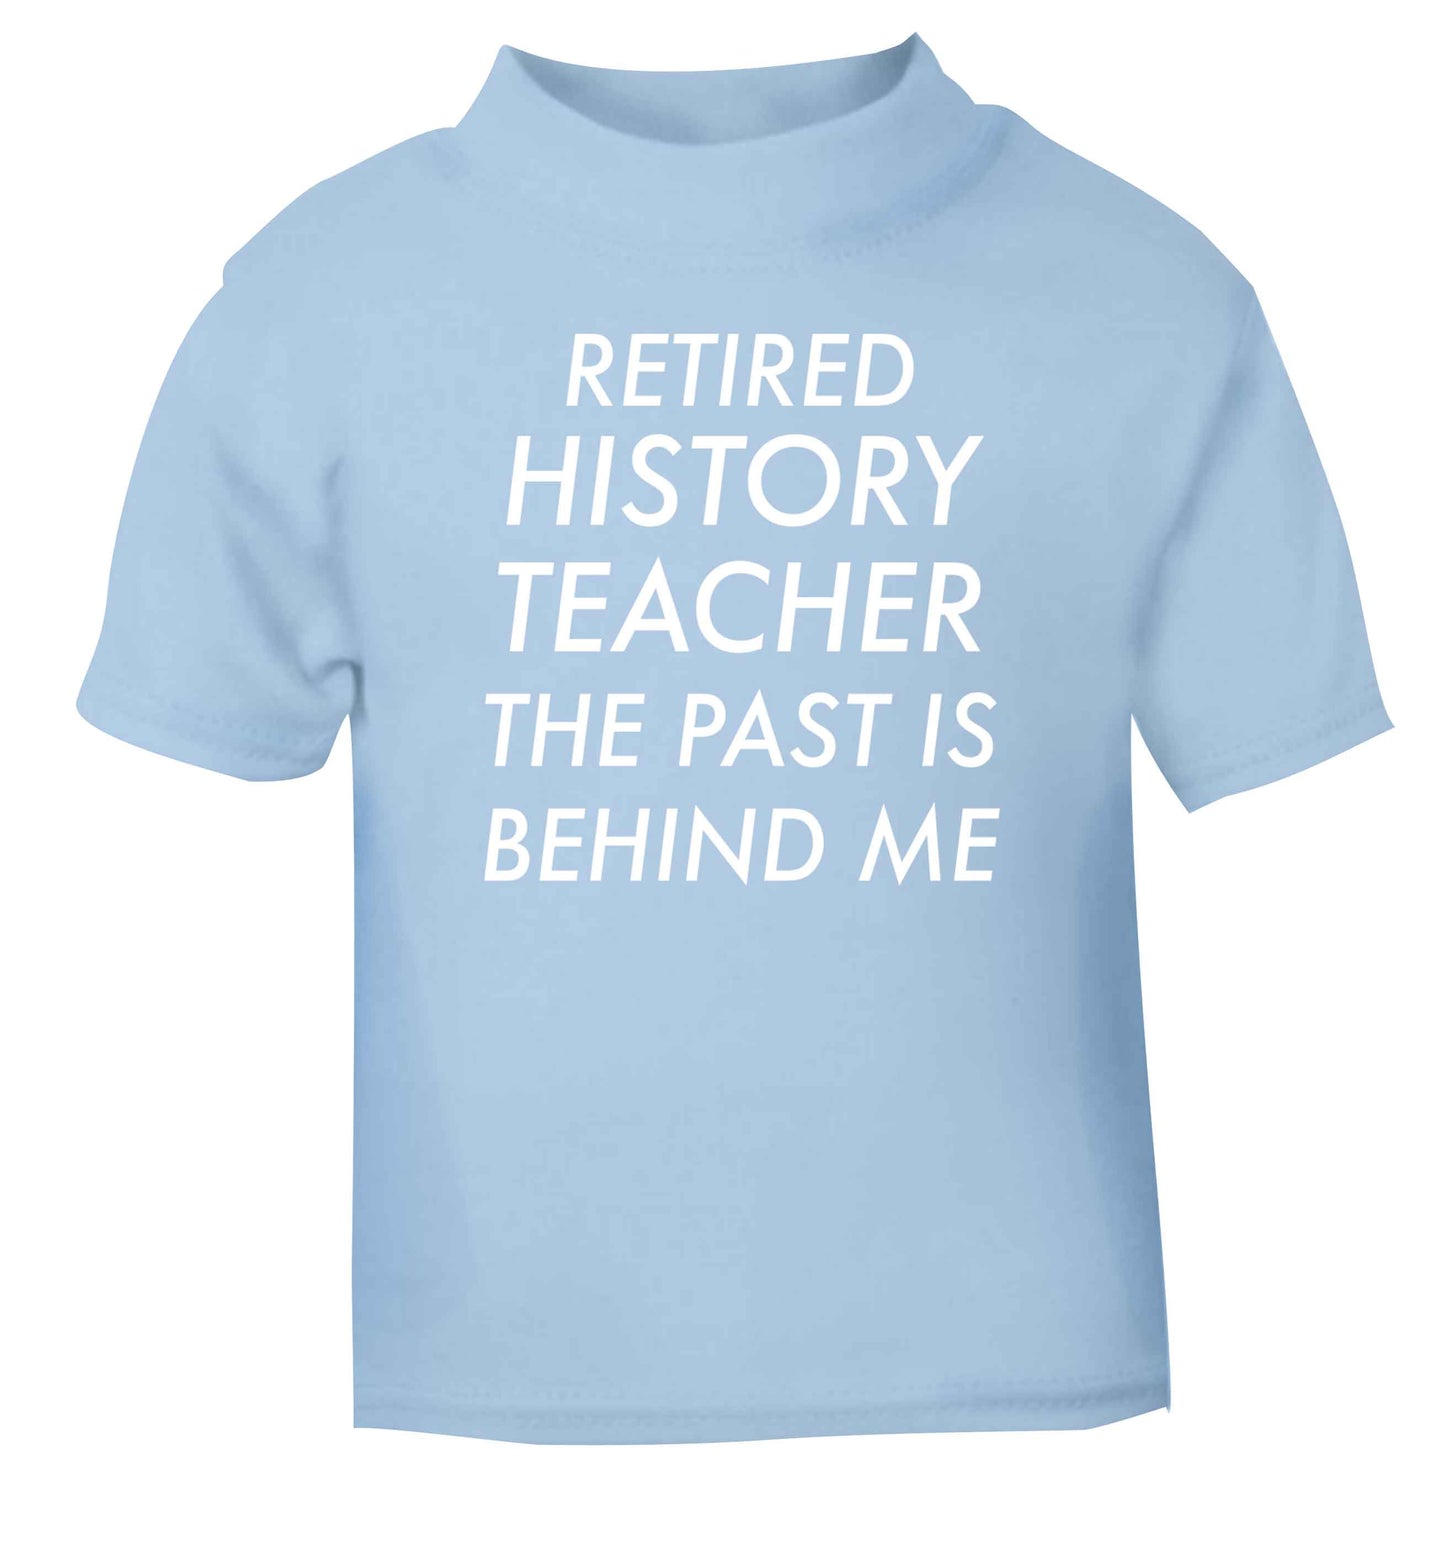 Retired history teacher the past is behind me light blue Baby Toddler Tshirt 2 Years